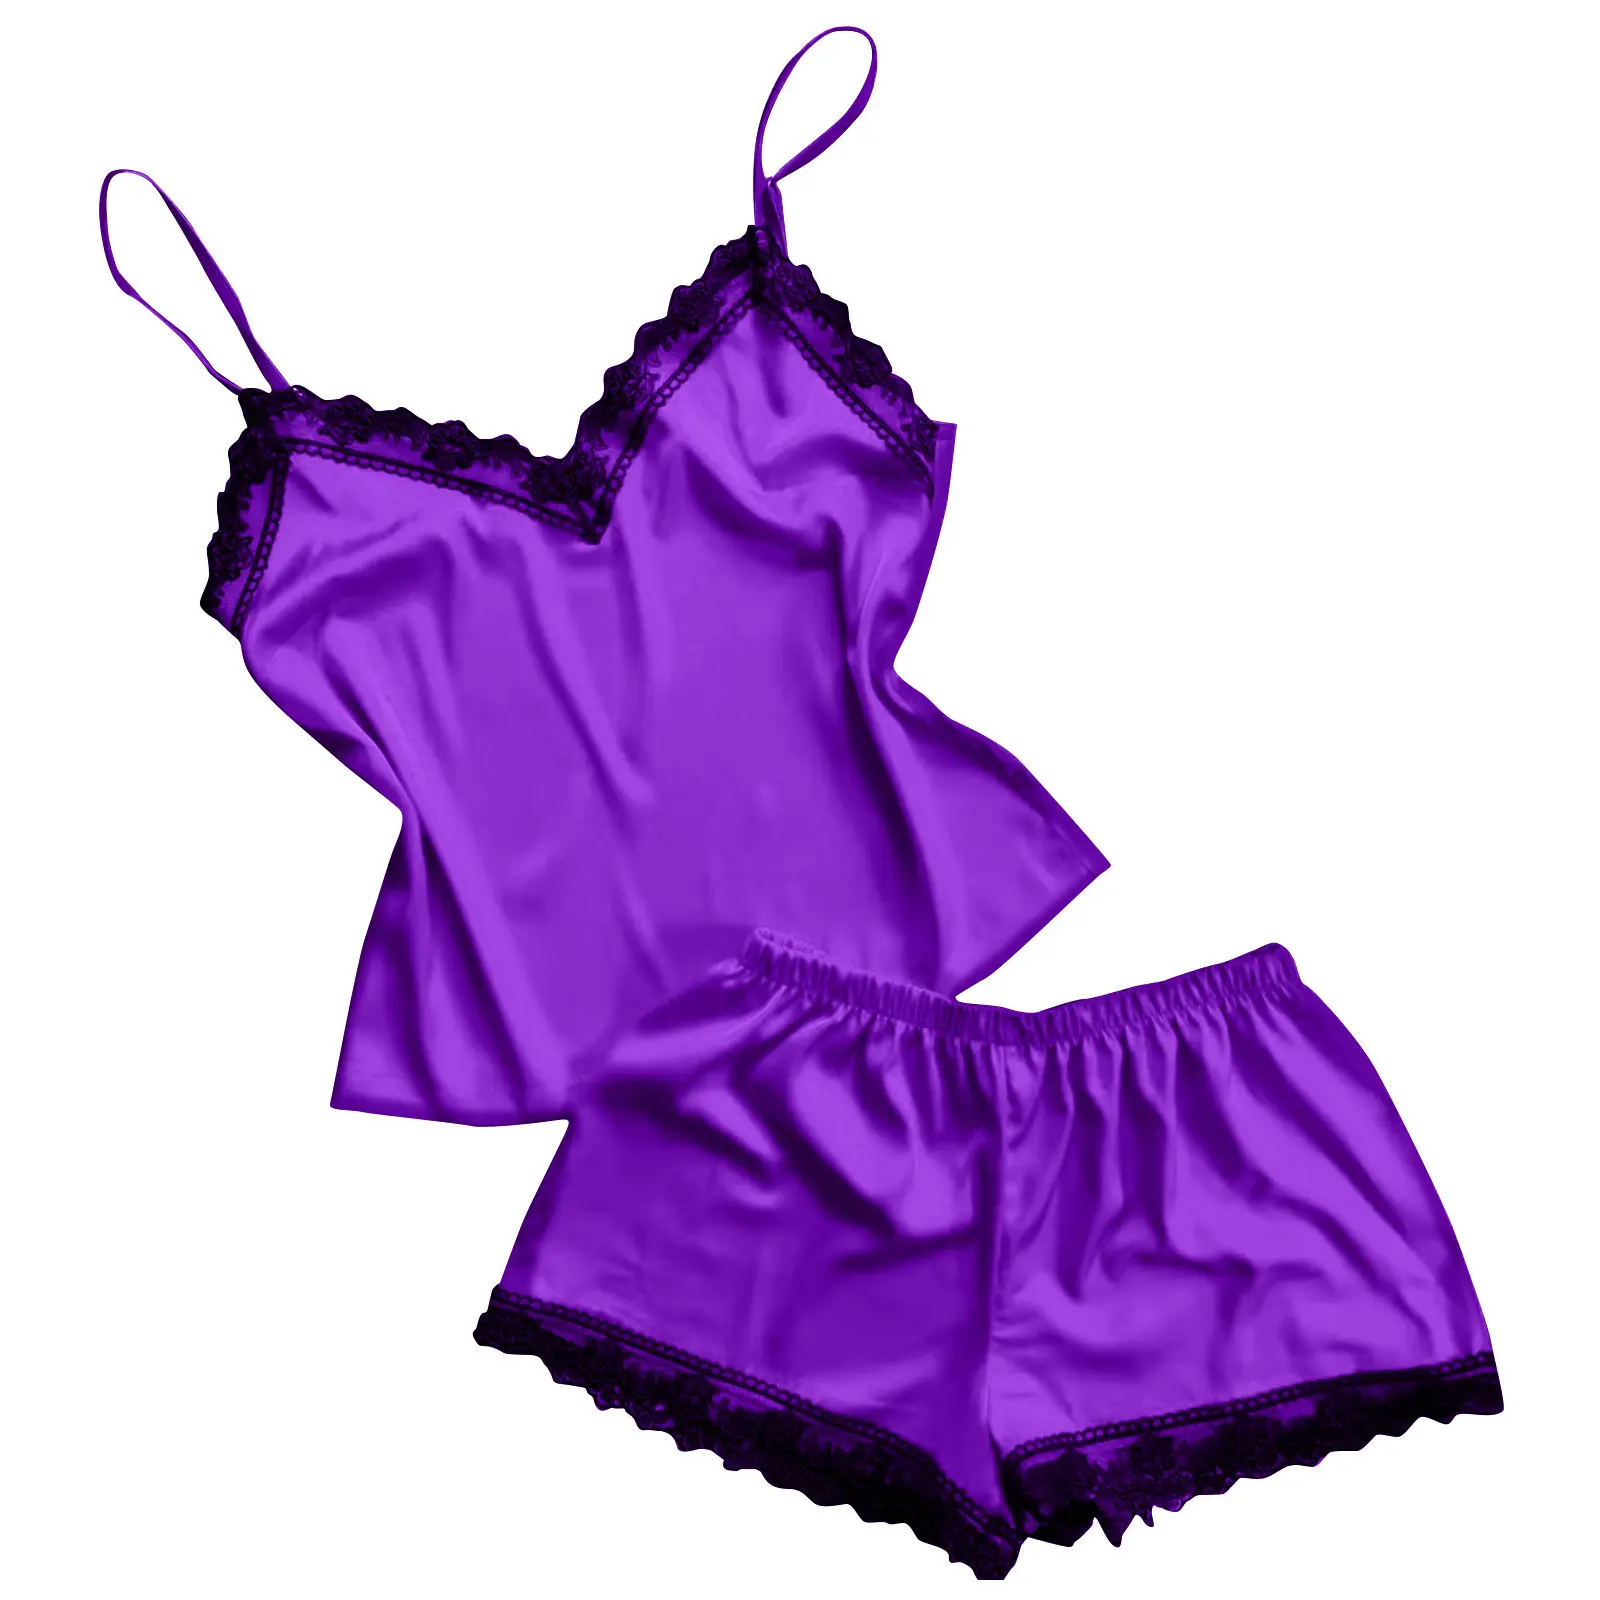 Purple pajamas two-piece set with V-neck lace and cool sexy suspenders and shorts